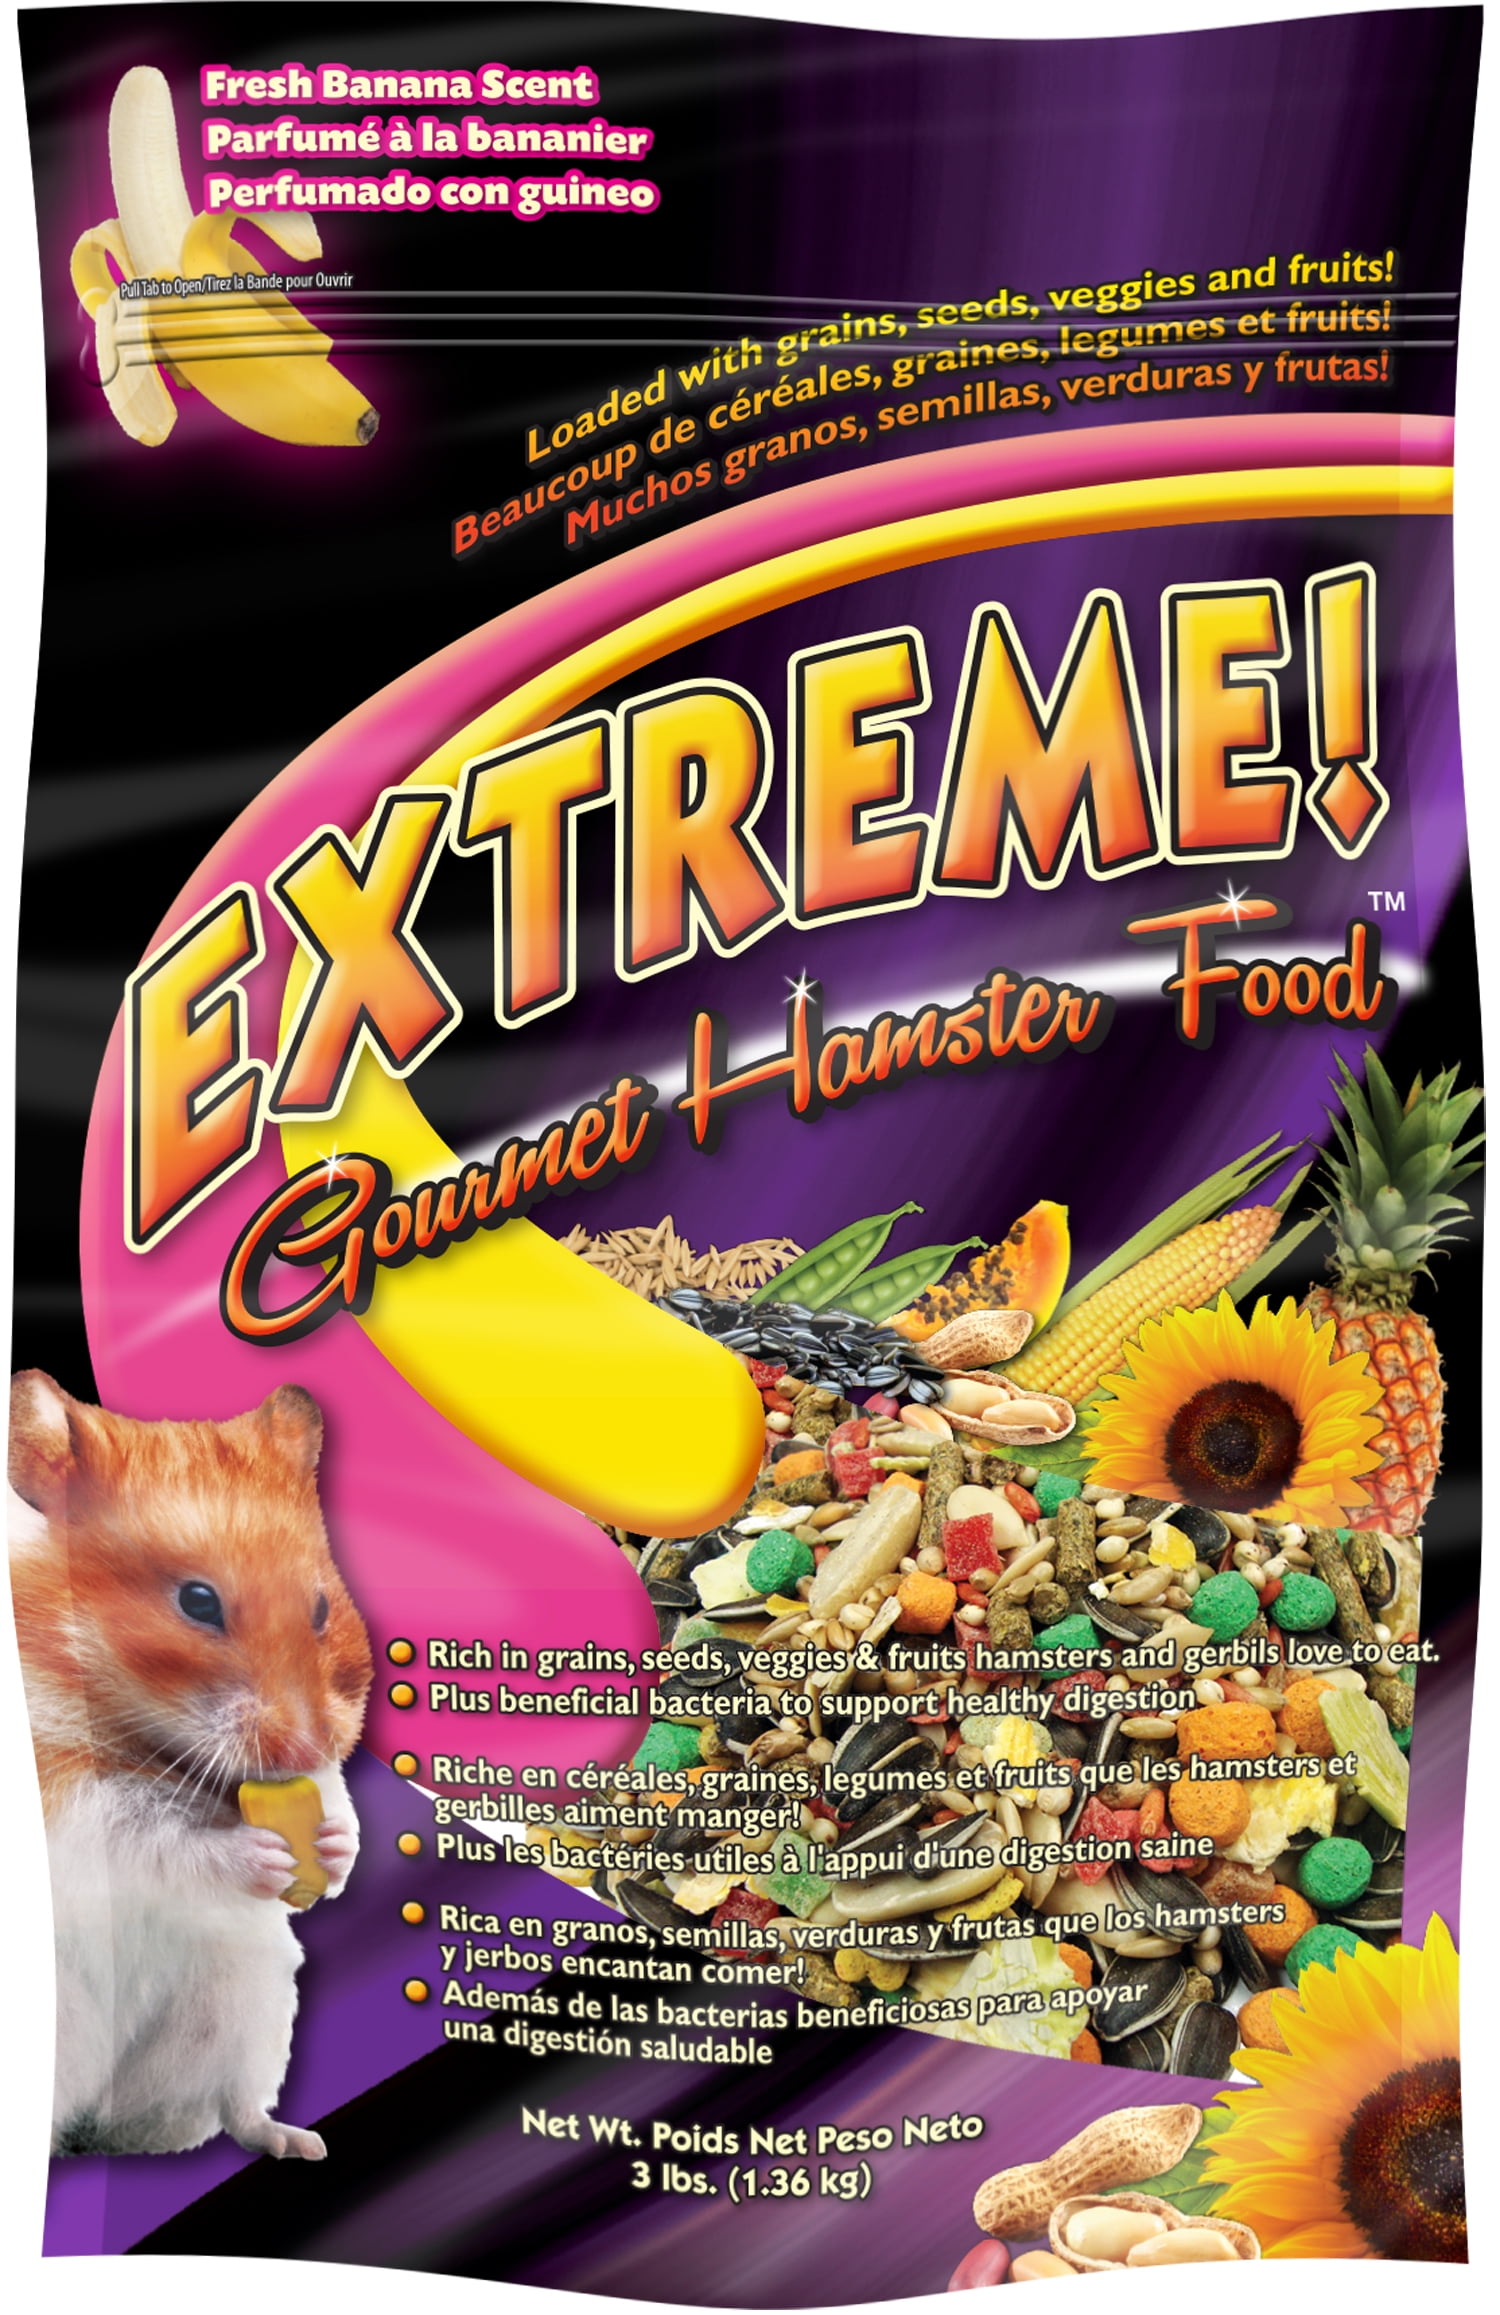 Extreme! Gourmet Hamster Food, 3 lb 